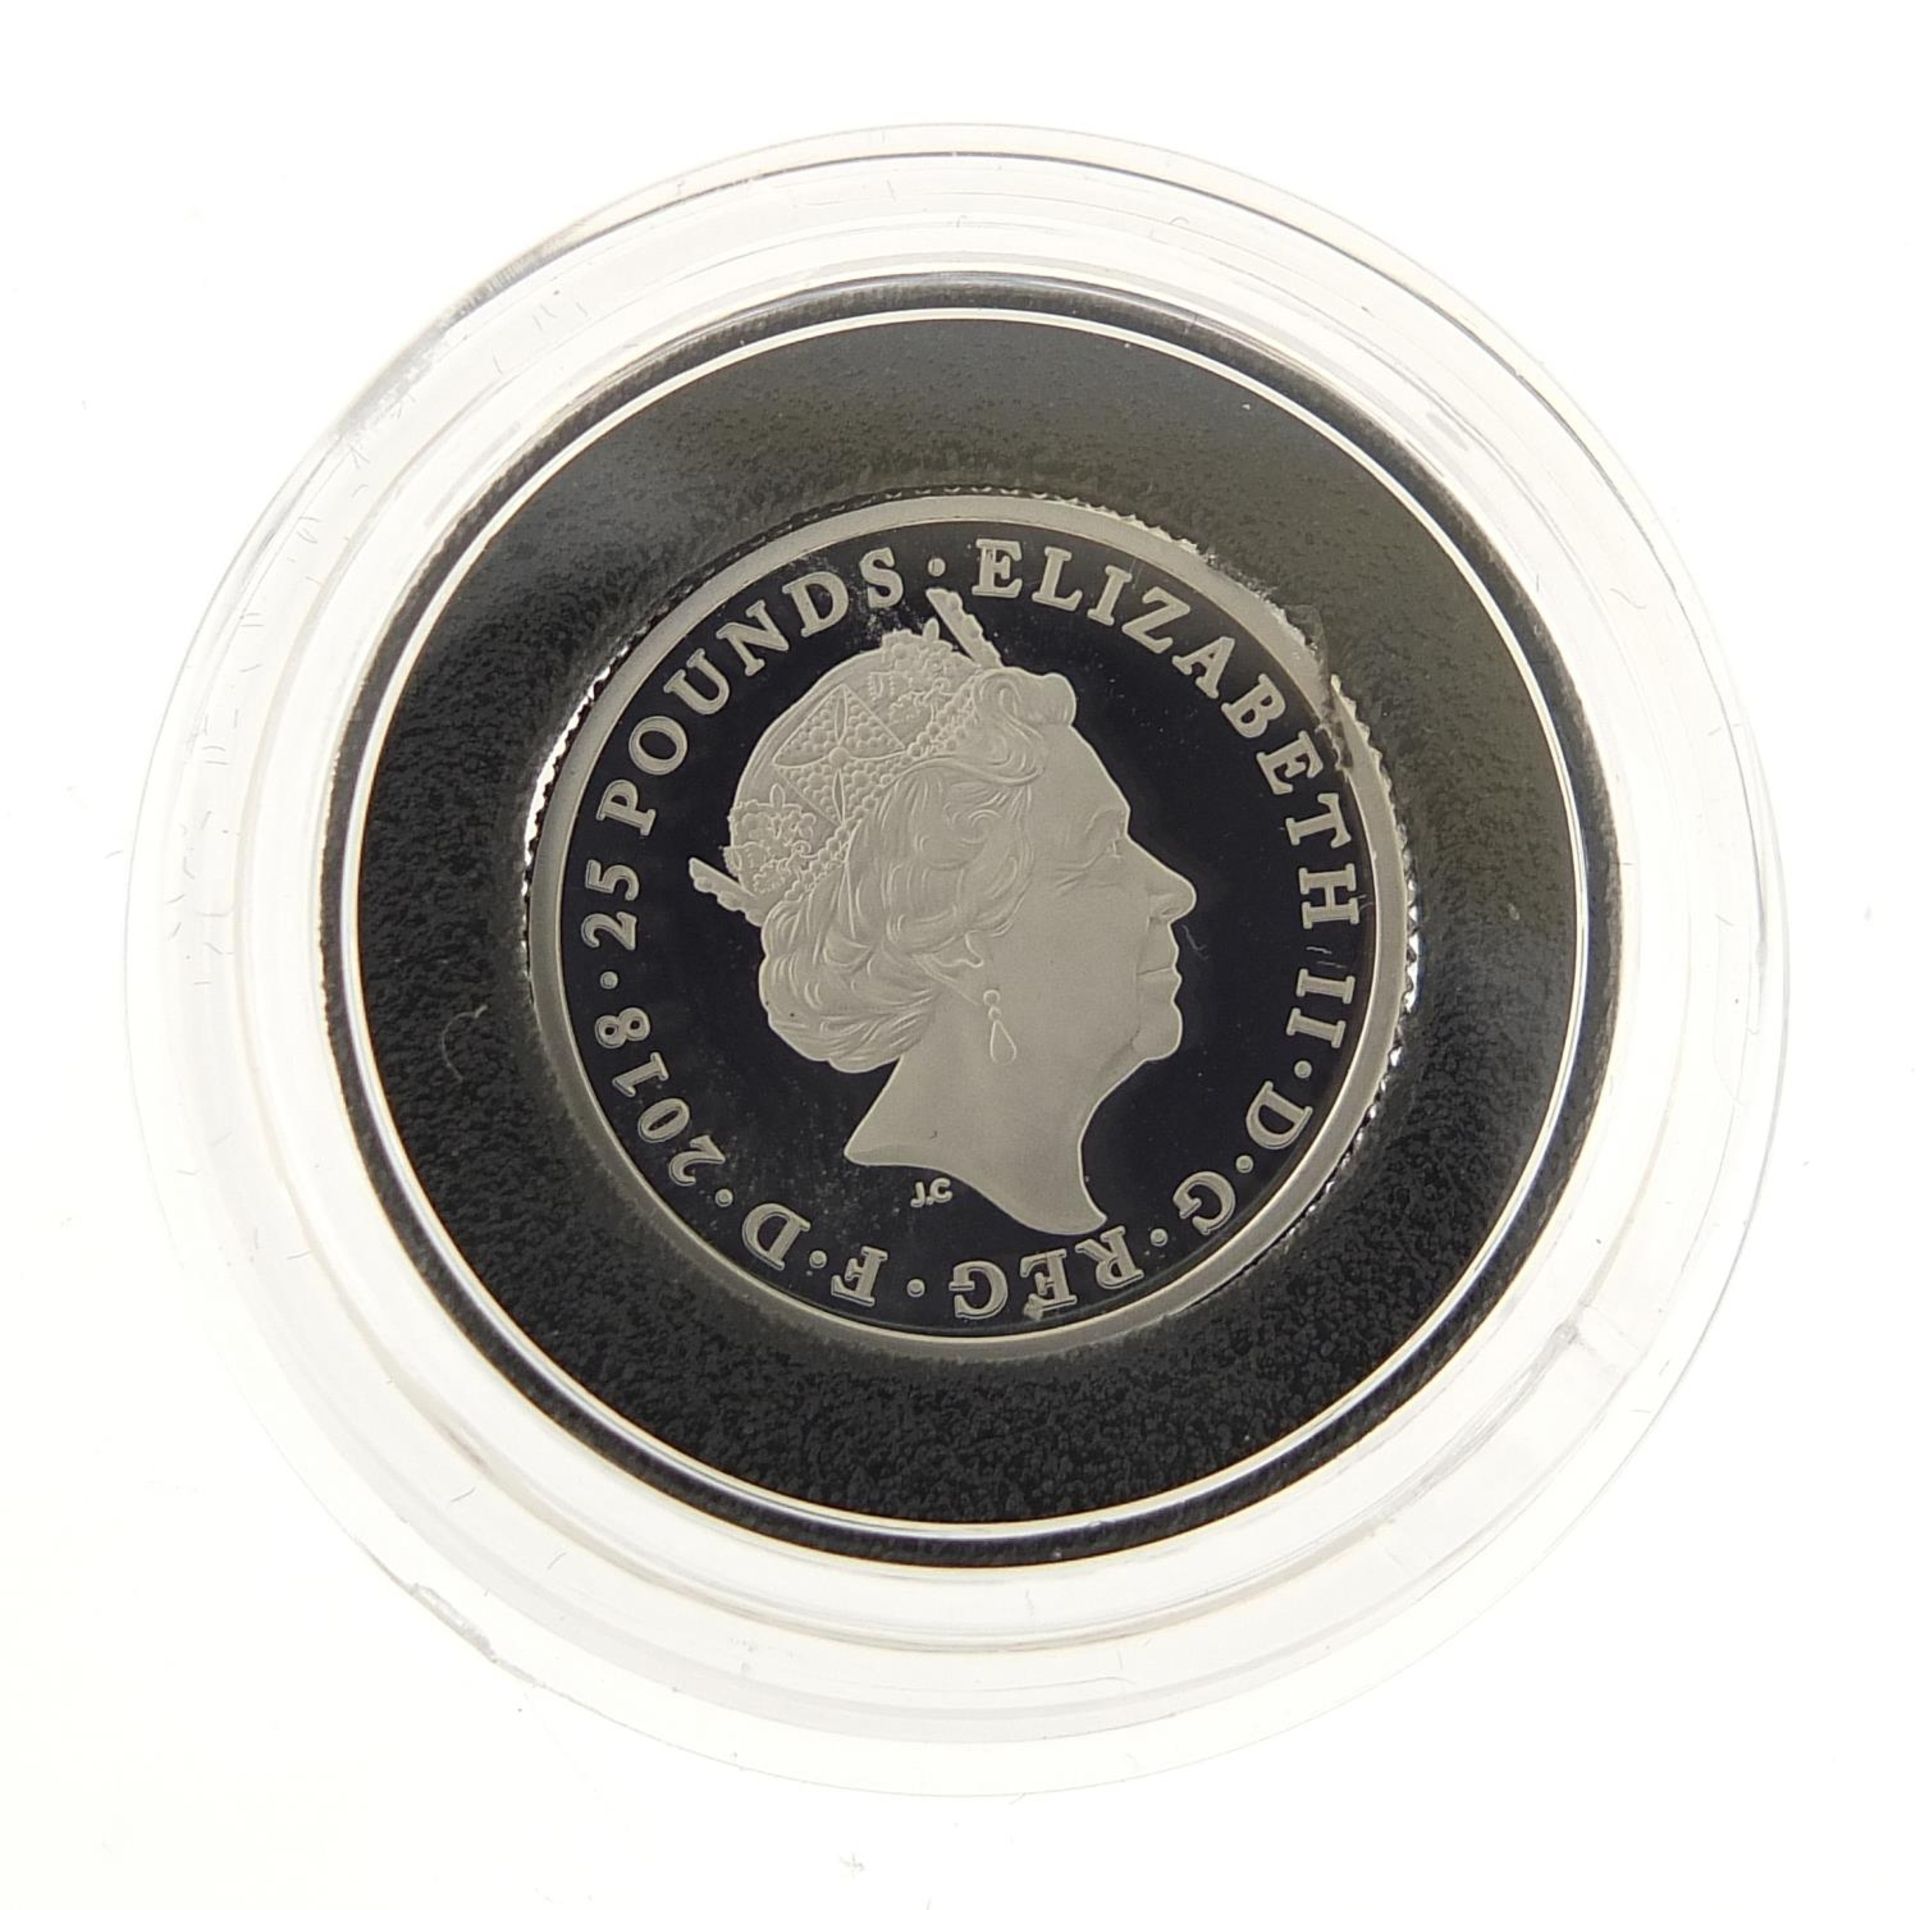 Queen Elizabeth II 2018 quarter ounce platinum proof coin commemorating the 70th birthday of HRH - Image 2 of 6